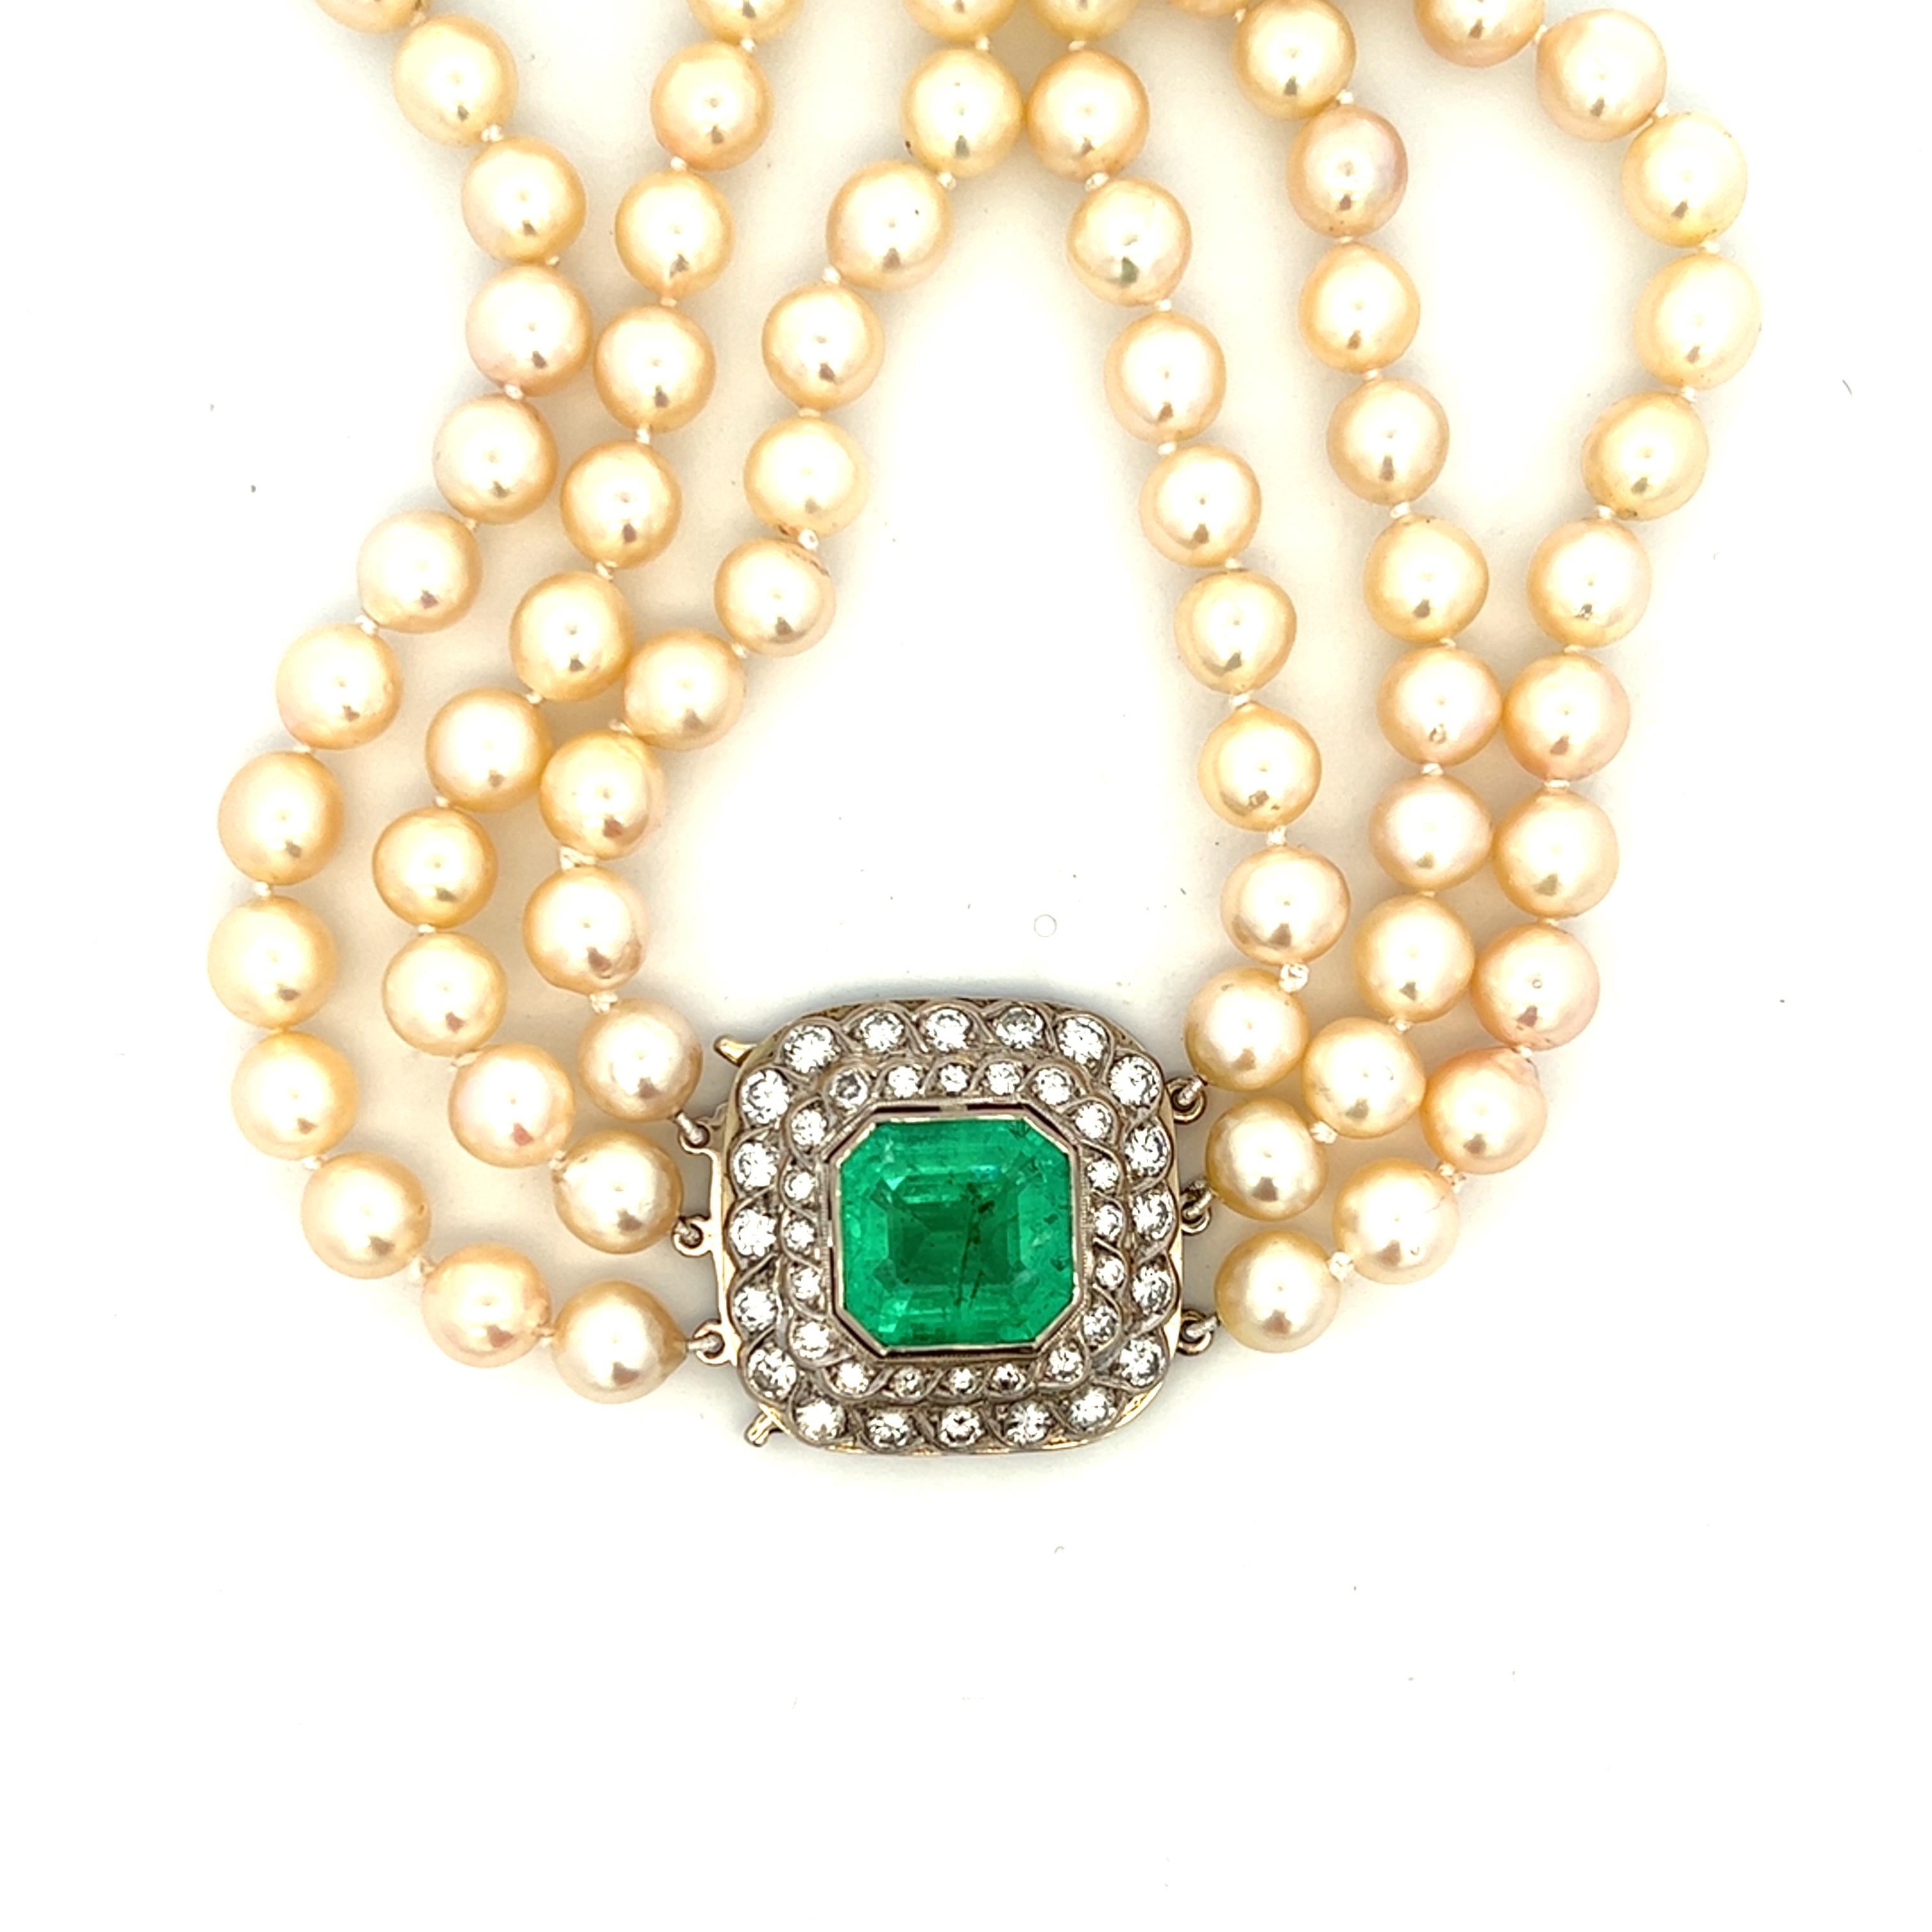 One 18 karat white gold triple strand freshwater pearl, emerald and diamond necklace, strung with seventy-eight (78) cream-colored freshwater pearls, measuring between 7.5-8mm. The necklace contains one 18 karat white gold square shaped pendant set